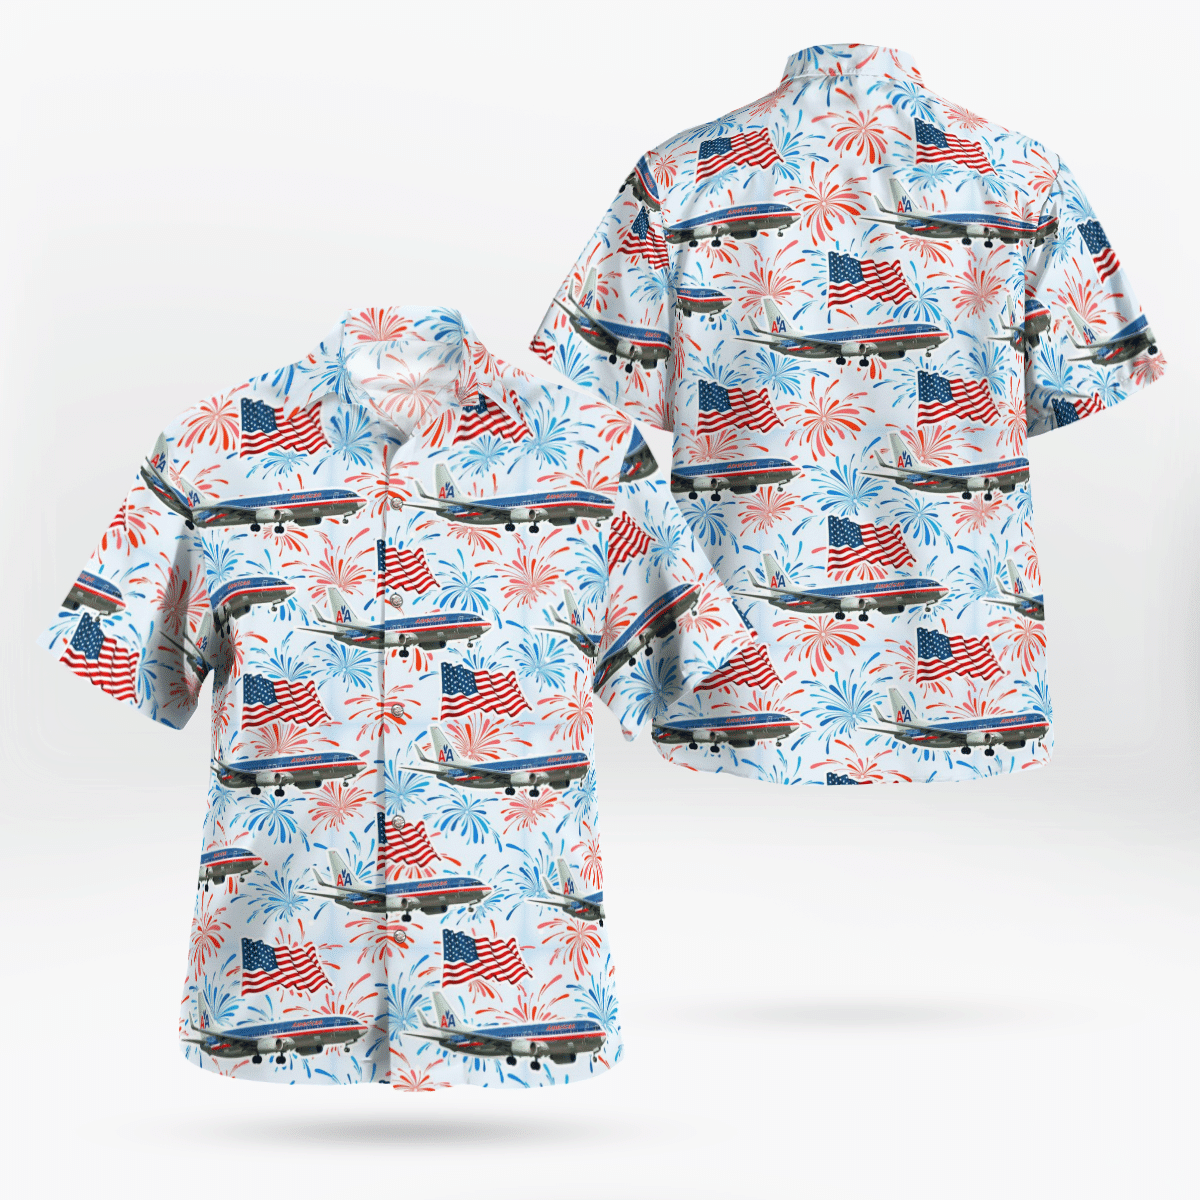 COOL American Airlines Boeing 737 823 Old Livery Independence Day 3D Hawaii Shirt1